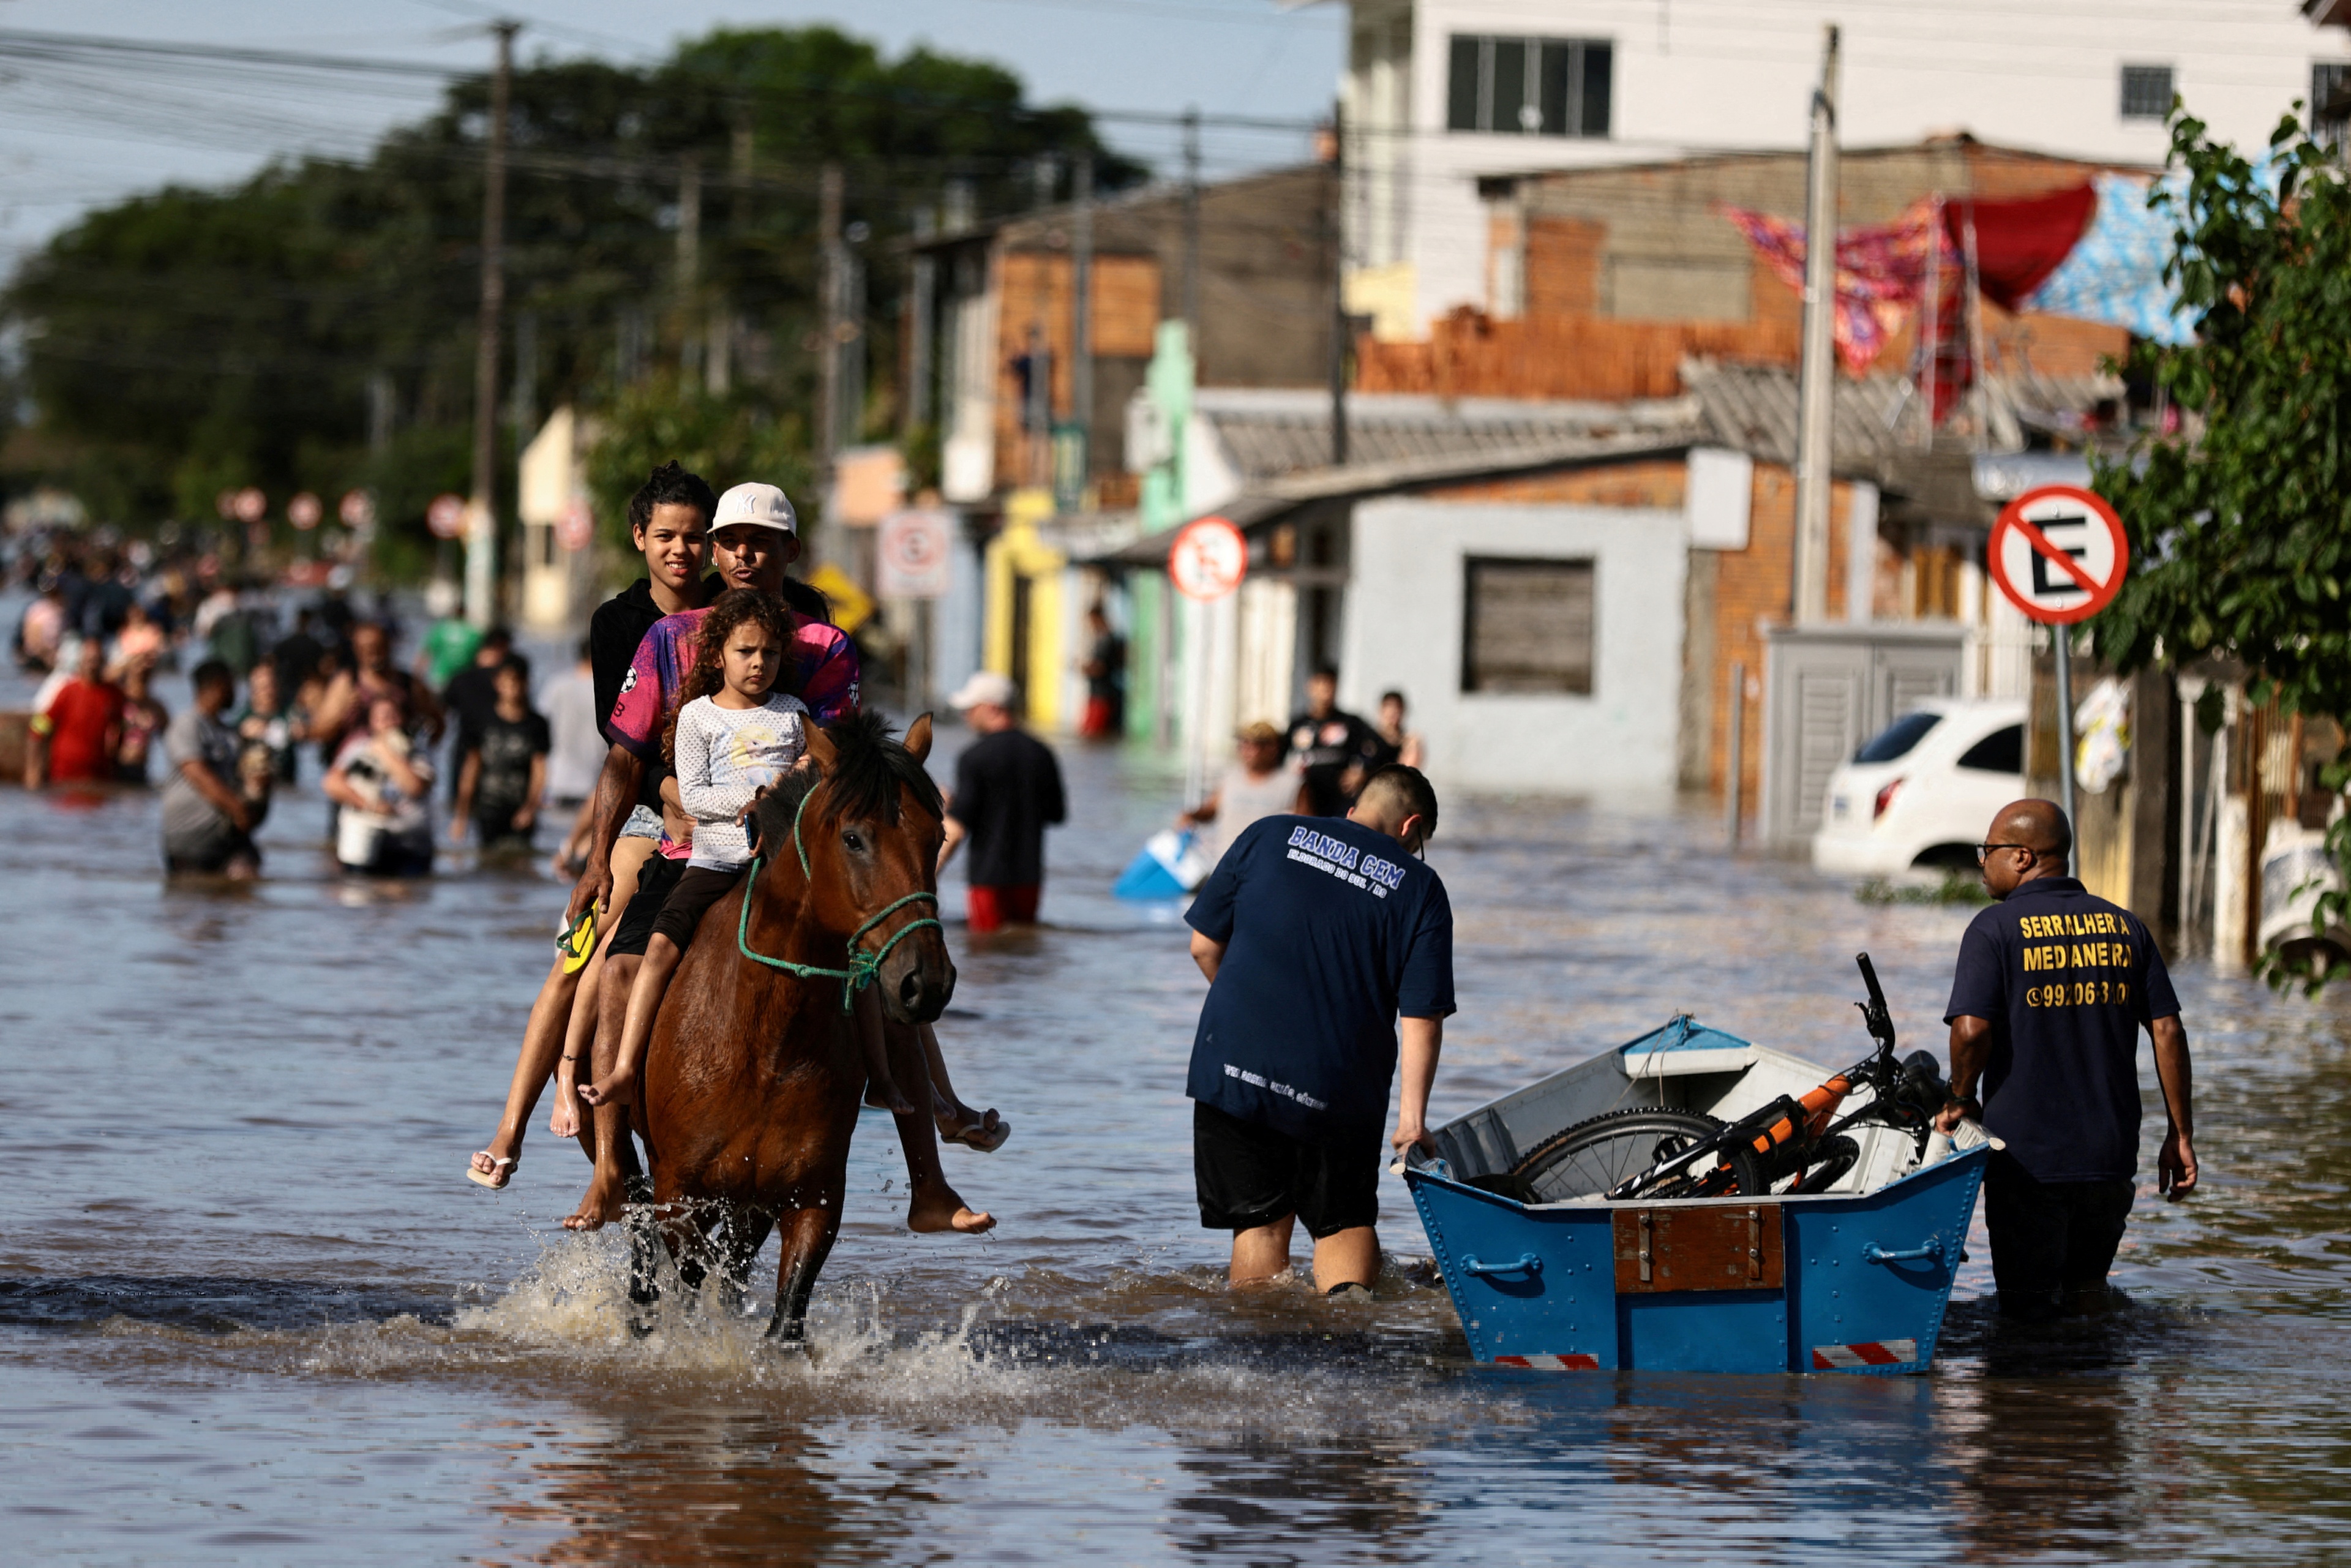 FILE PHOTO: People ride on a horse due to flooding caused by heavy rains in Eldorado do Sul, Rio Grande do Sul state, Brazil November 20, 2023. REUTERS/Diego Vara/File Photo